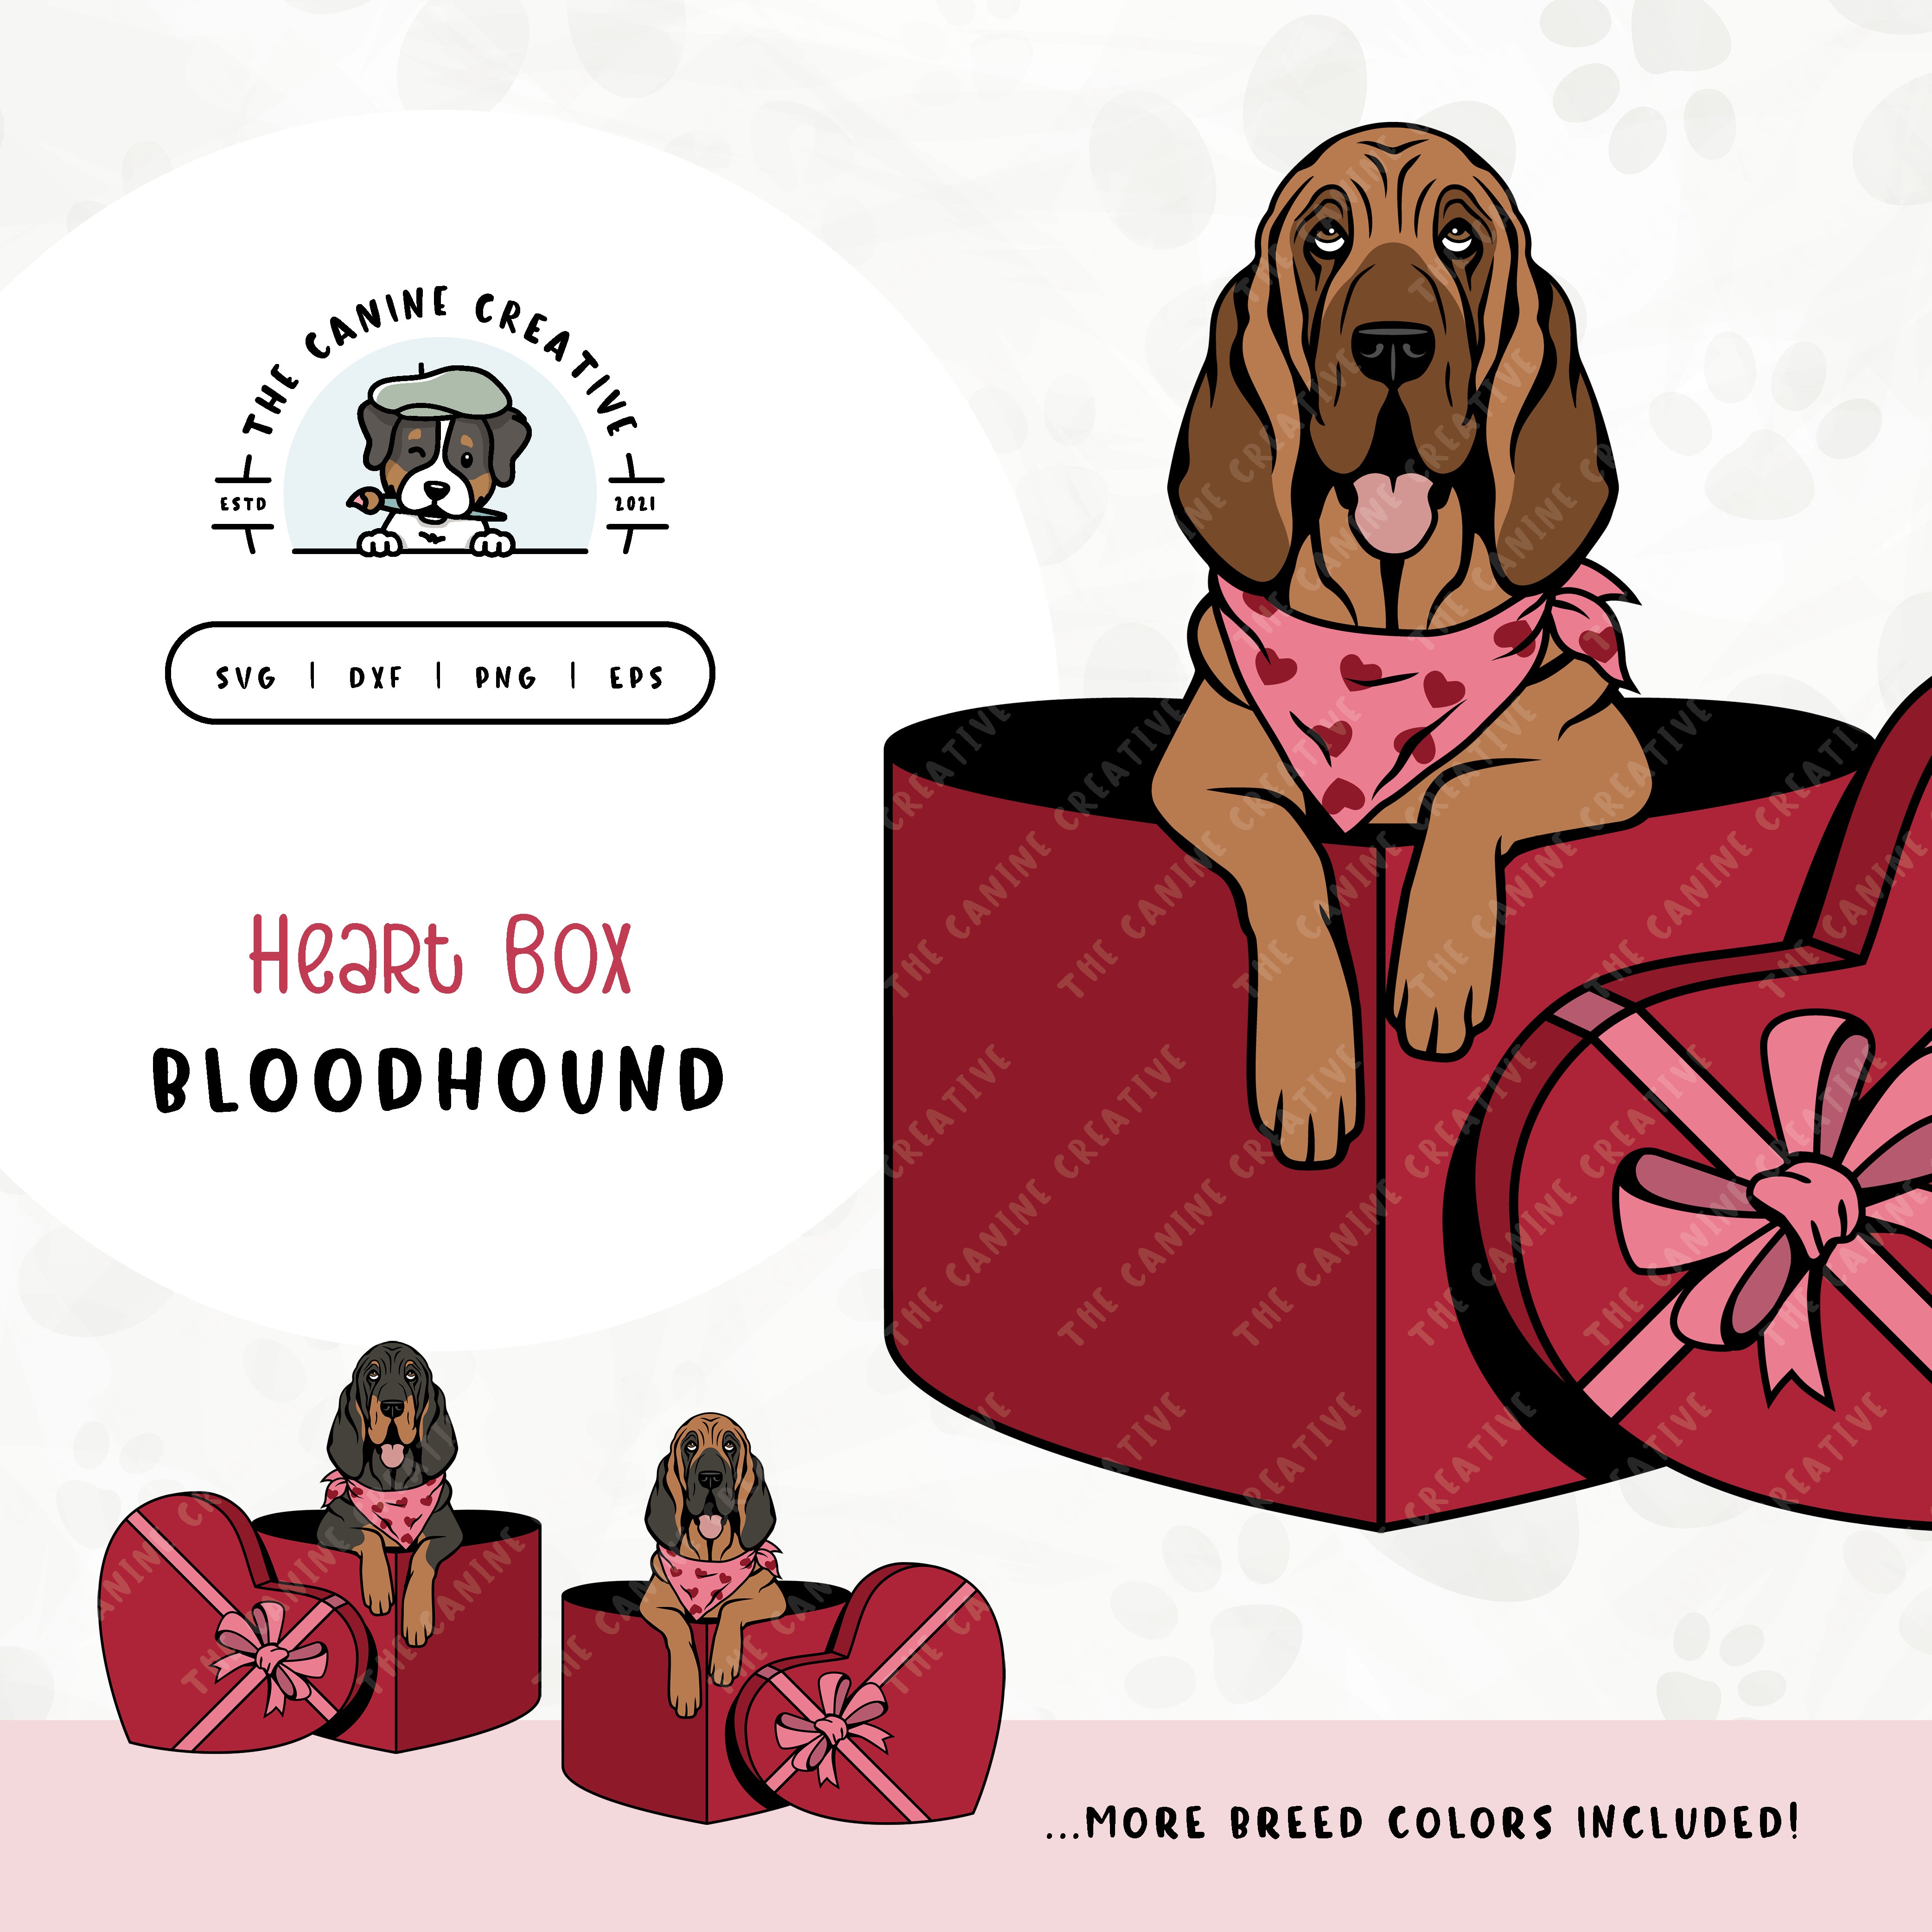 This charming Bloodhound illustration features a peeking dog in a heart-shaped box. File formats include: SVG, DXF, PNG, and EPS.